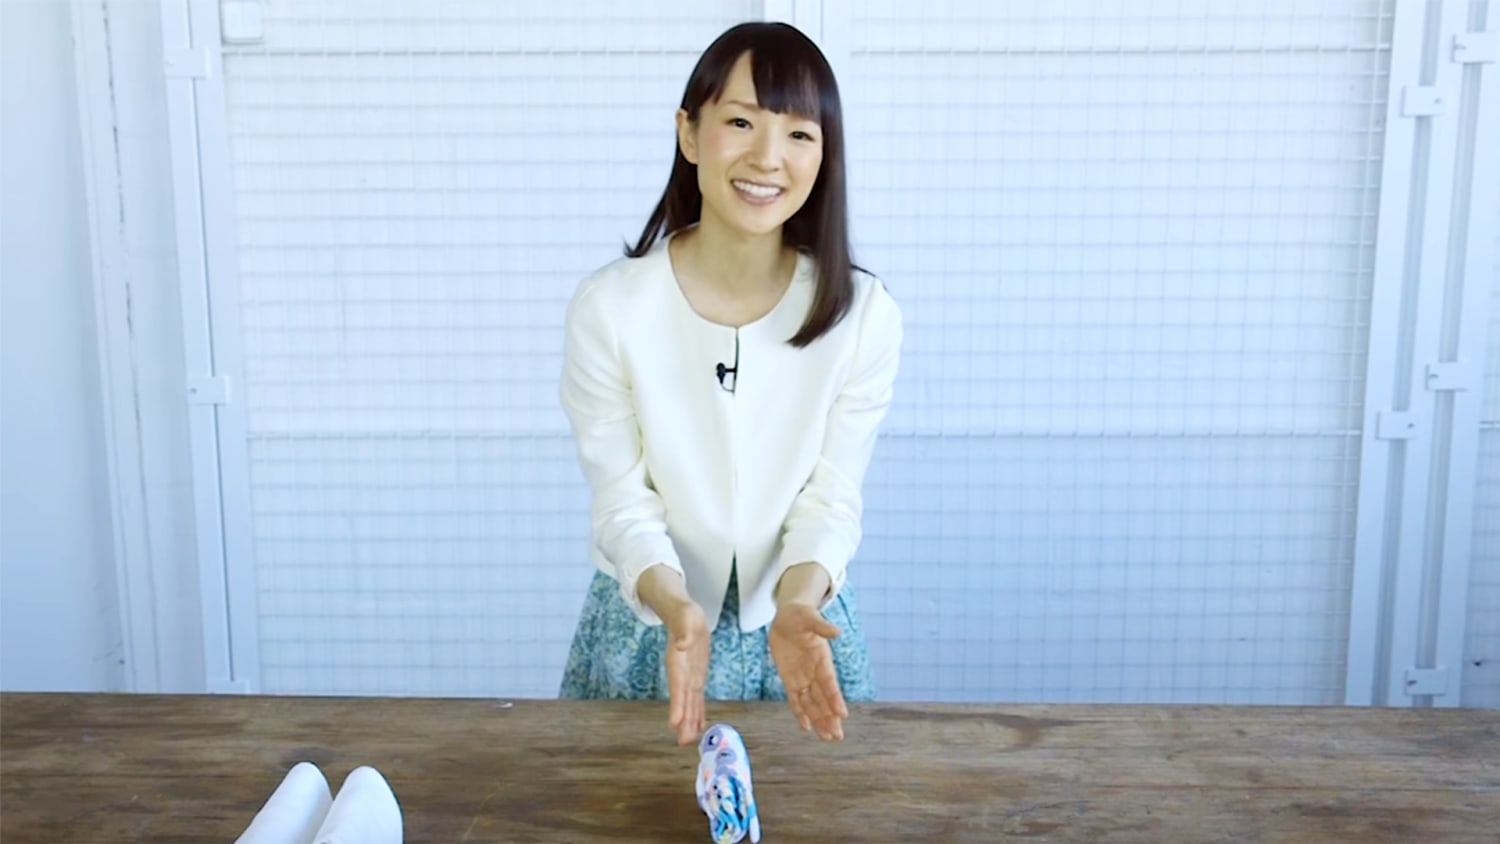 Learn how to fold shirts and pants the Marie Kondo way